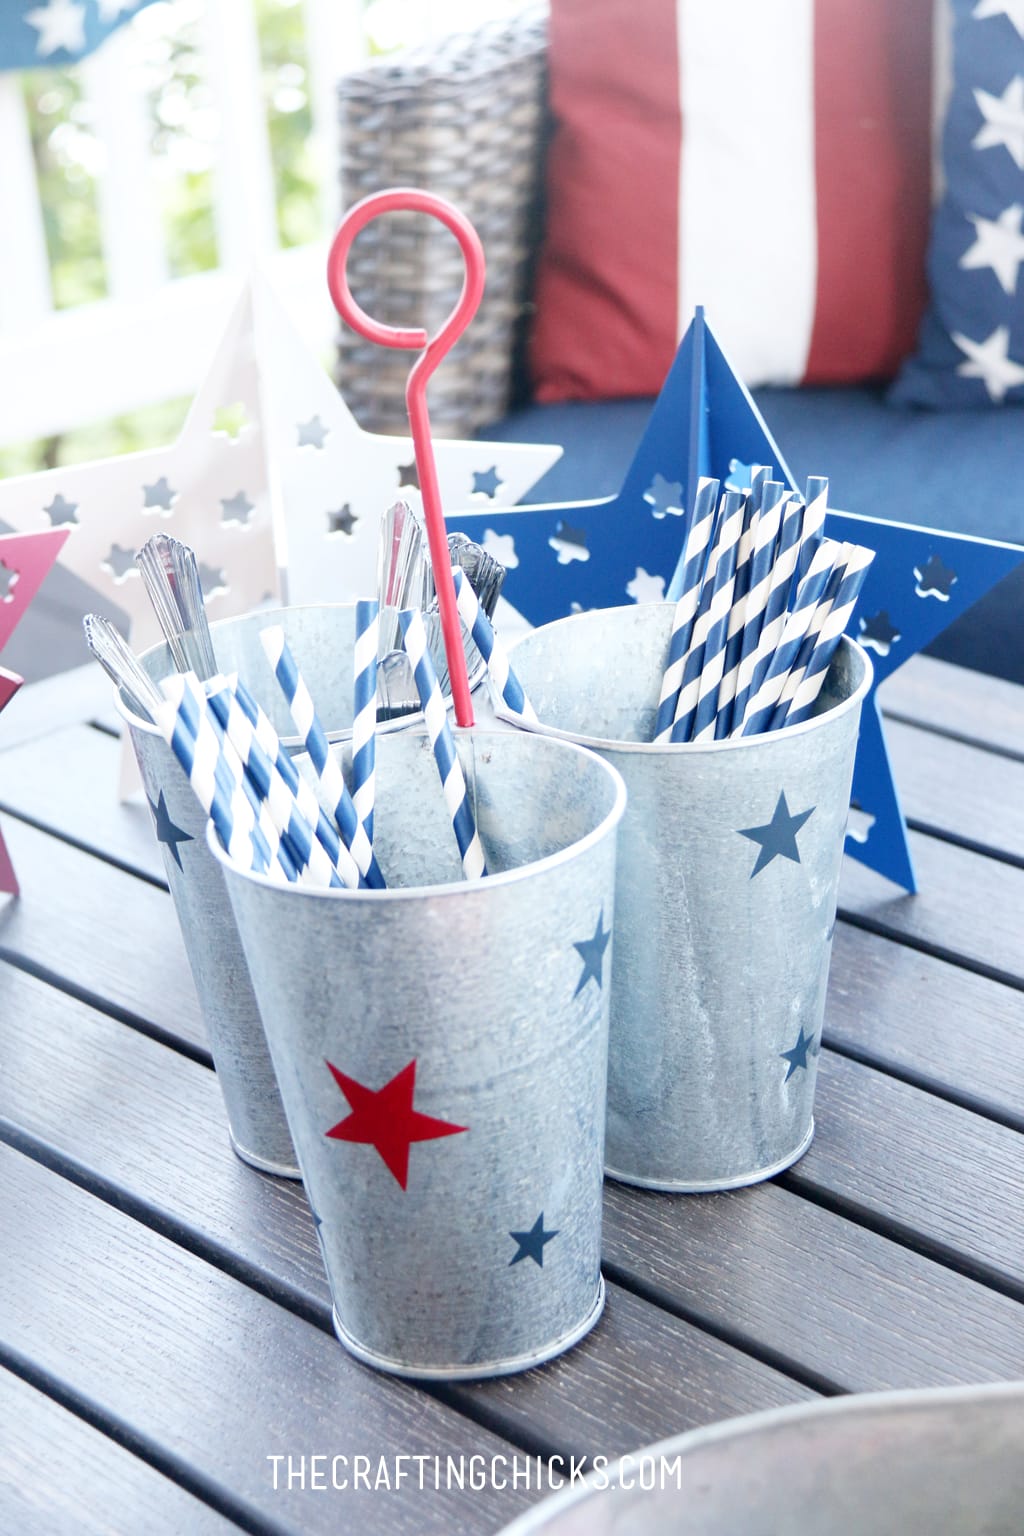 Metal Galvanized utensil holder with red and blue stars.